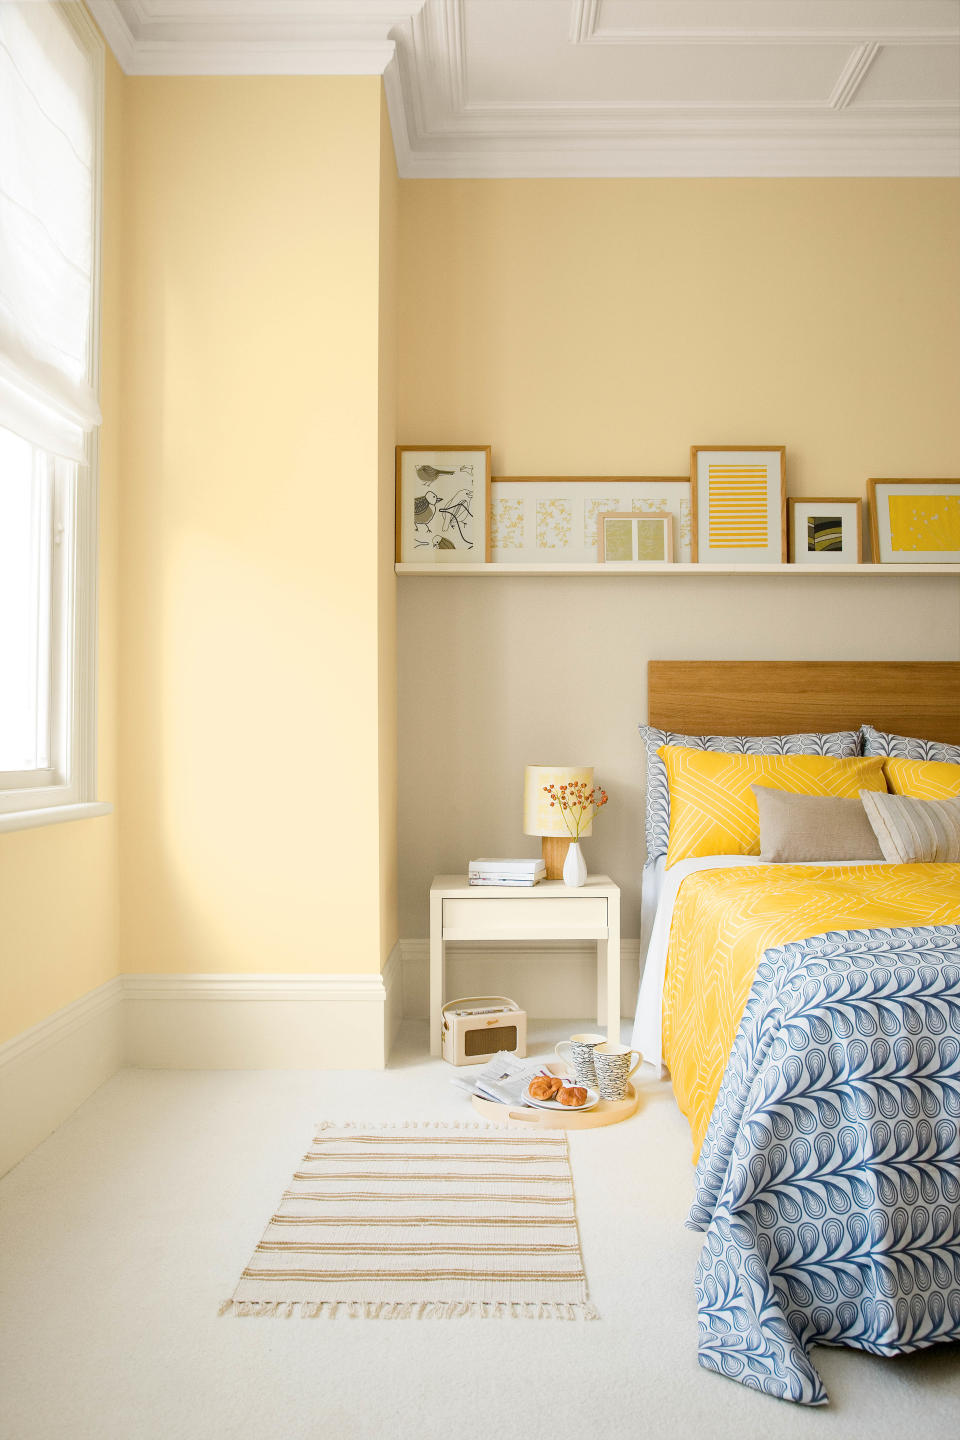 Redesign your bedroom with a new color scheme